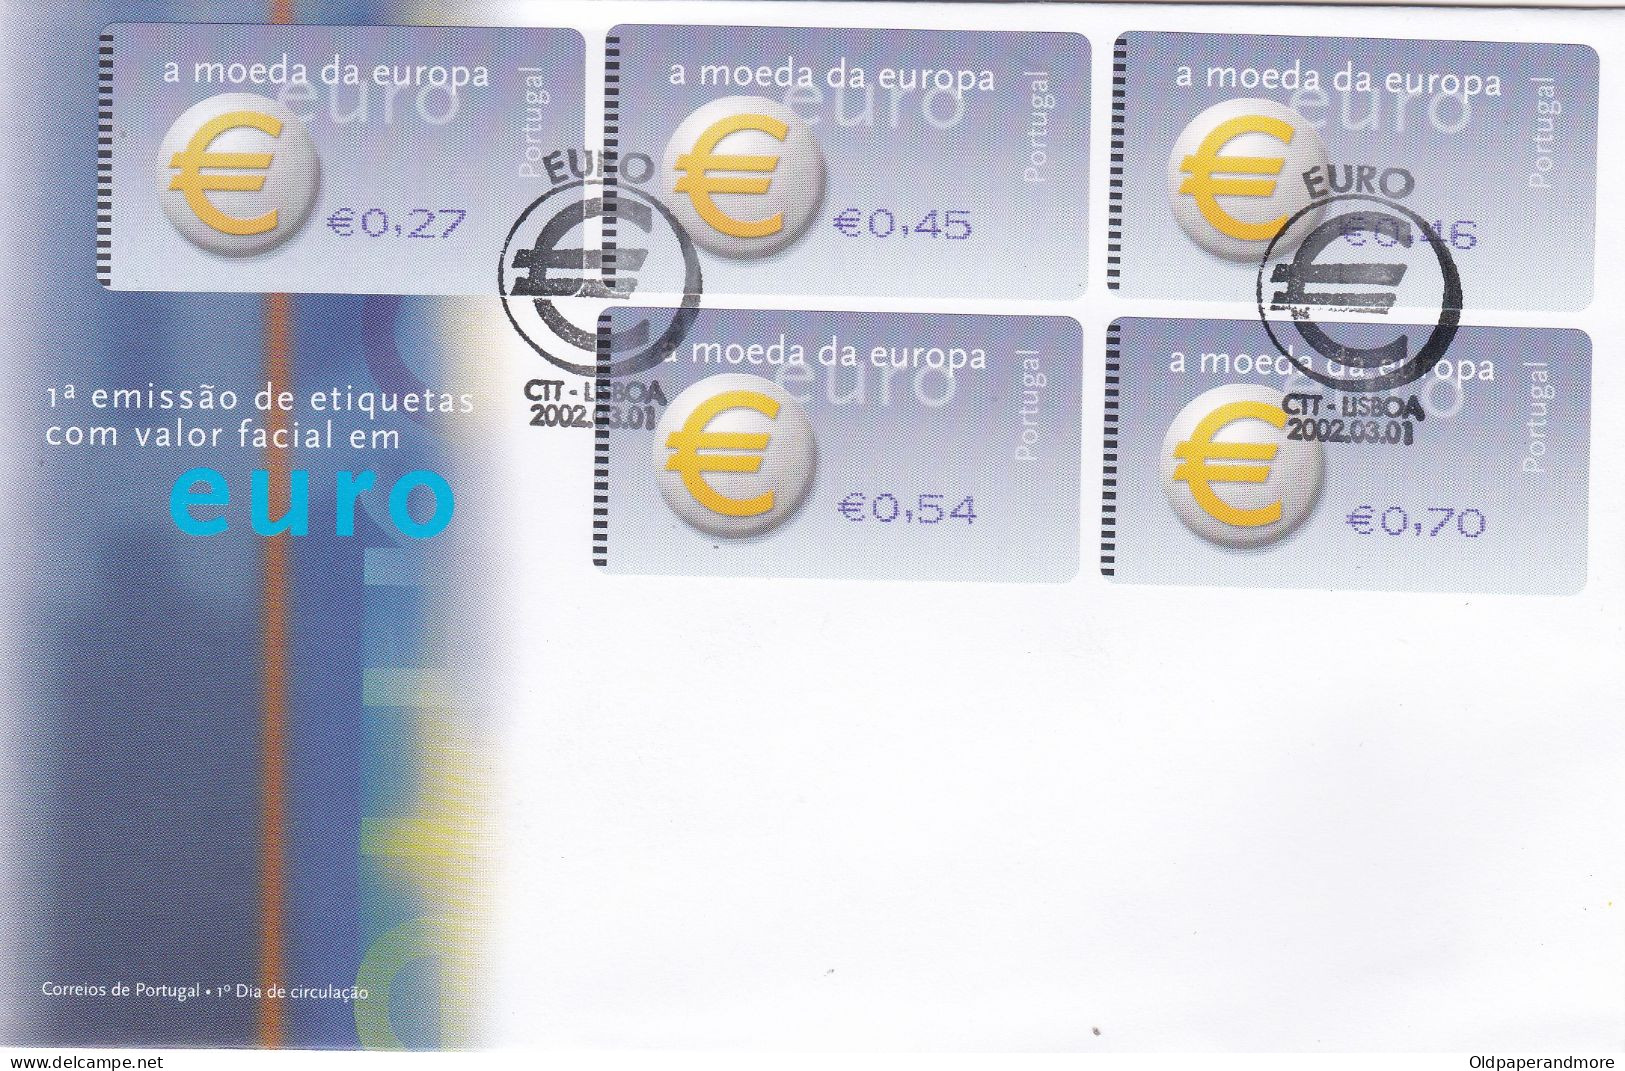 Portugal Stamps -  2002 ATM  - A MOEDA DA EUROPA - EURO COIN  - First Day Cover - FDC